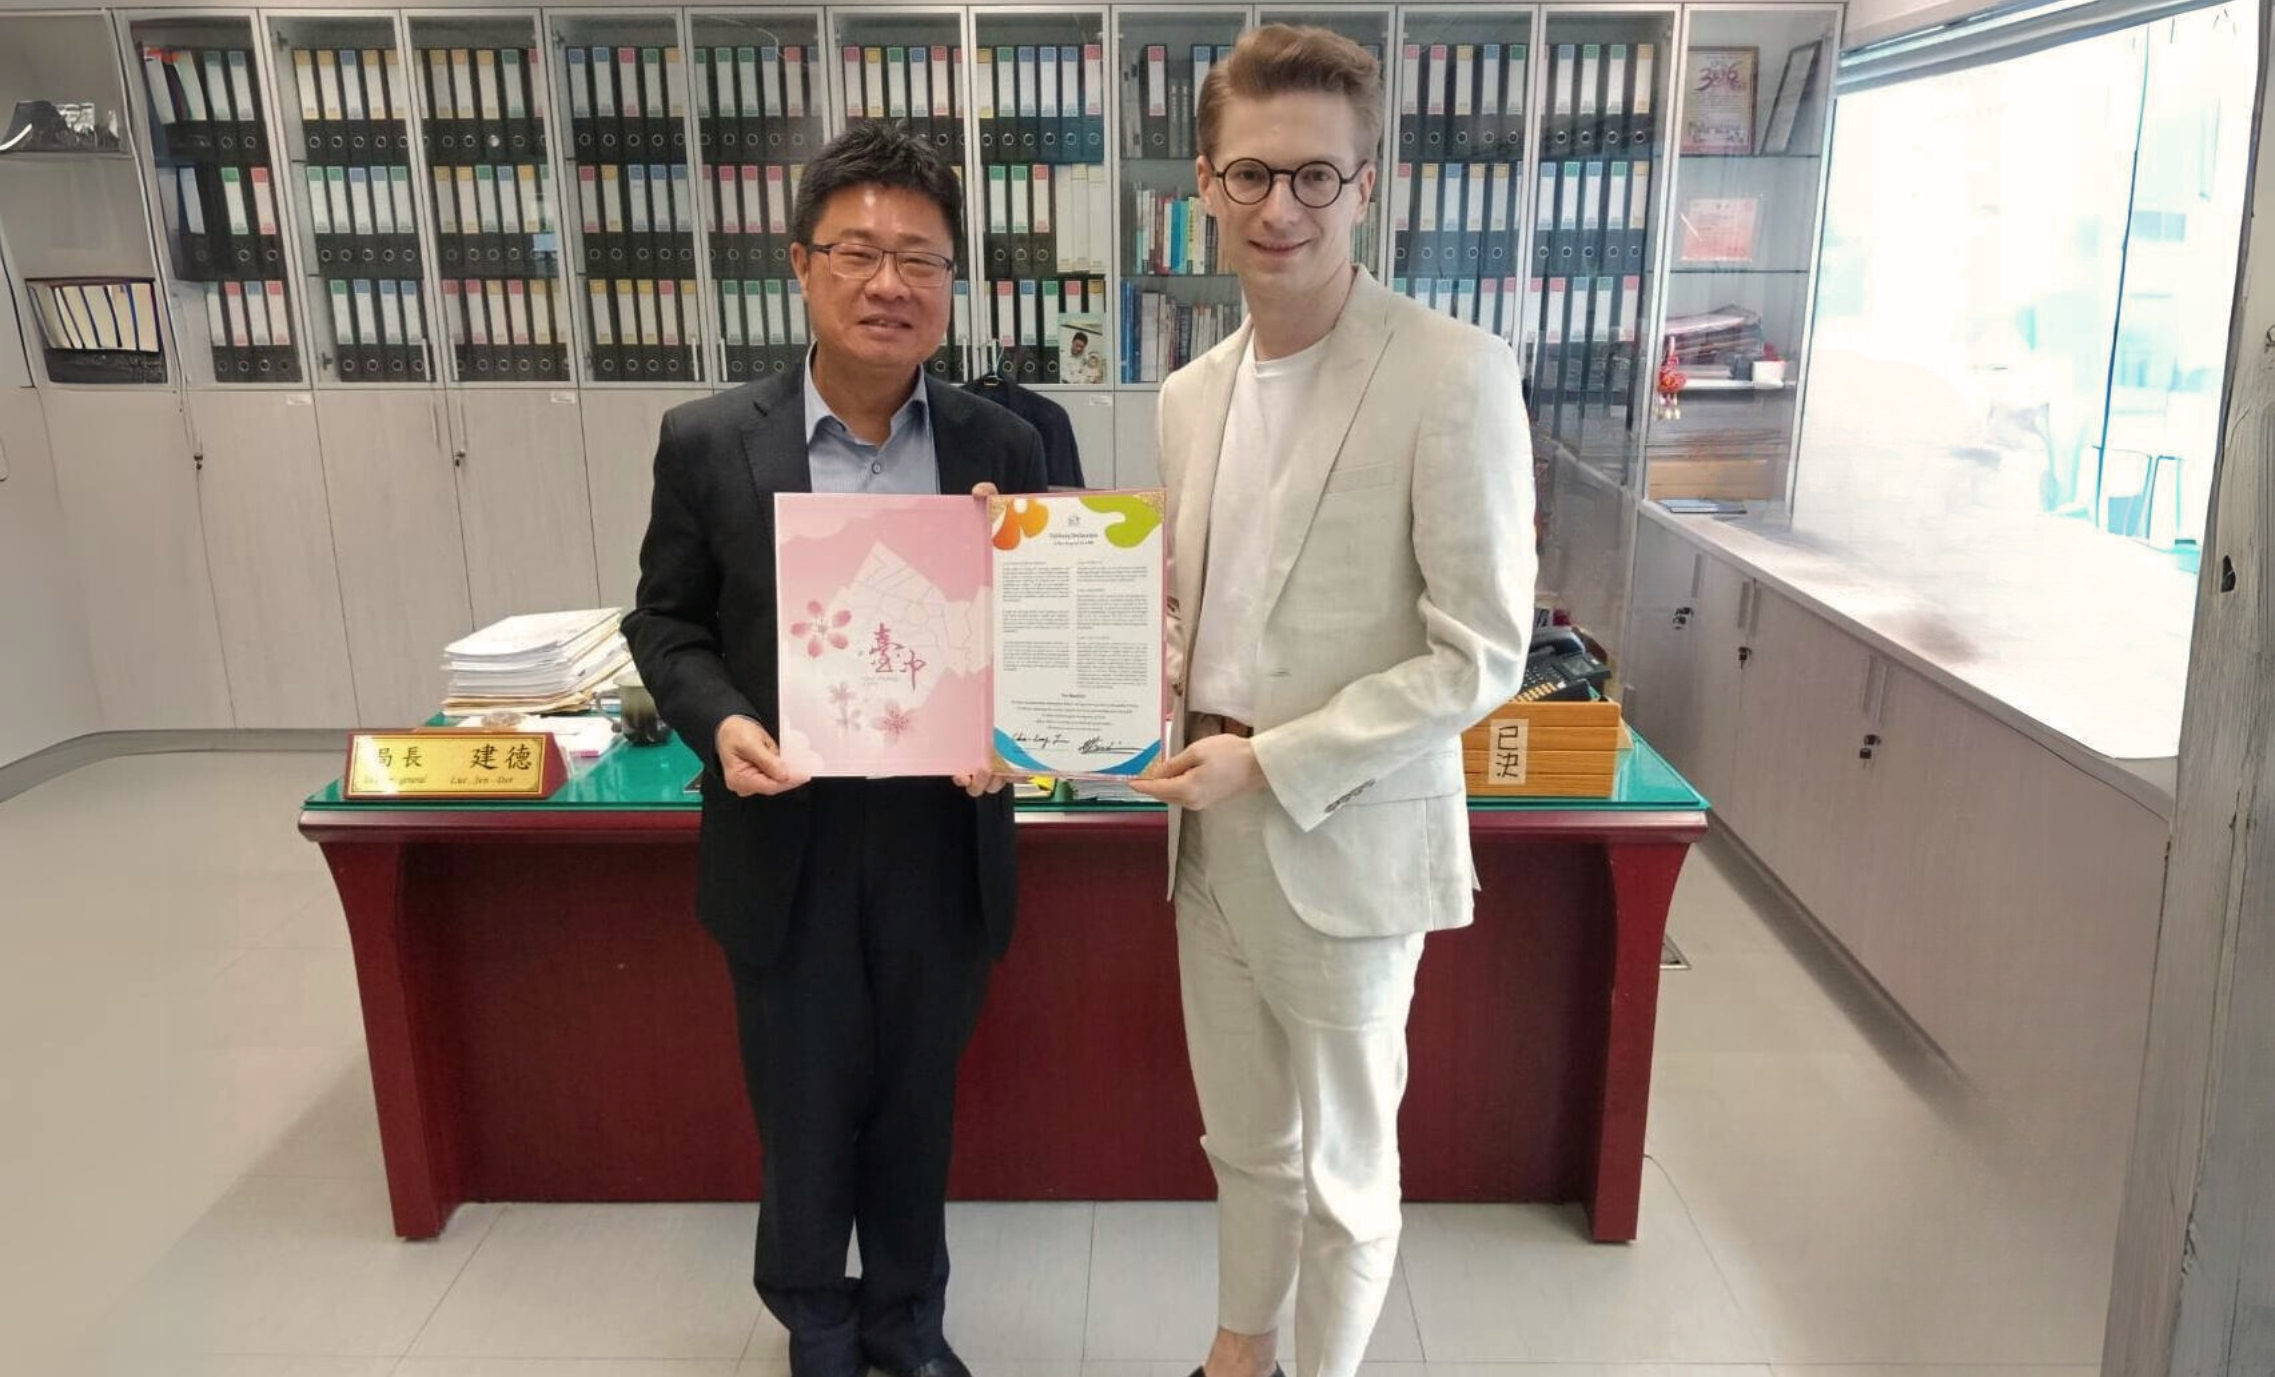 Following an invitation from the Taichung City Government, Marcis Skadmanis signed the Taichung Declaration of Gross National Product at their headquarters in Taichung, Taiwan.